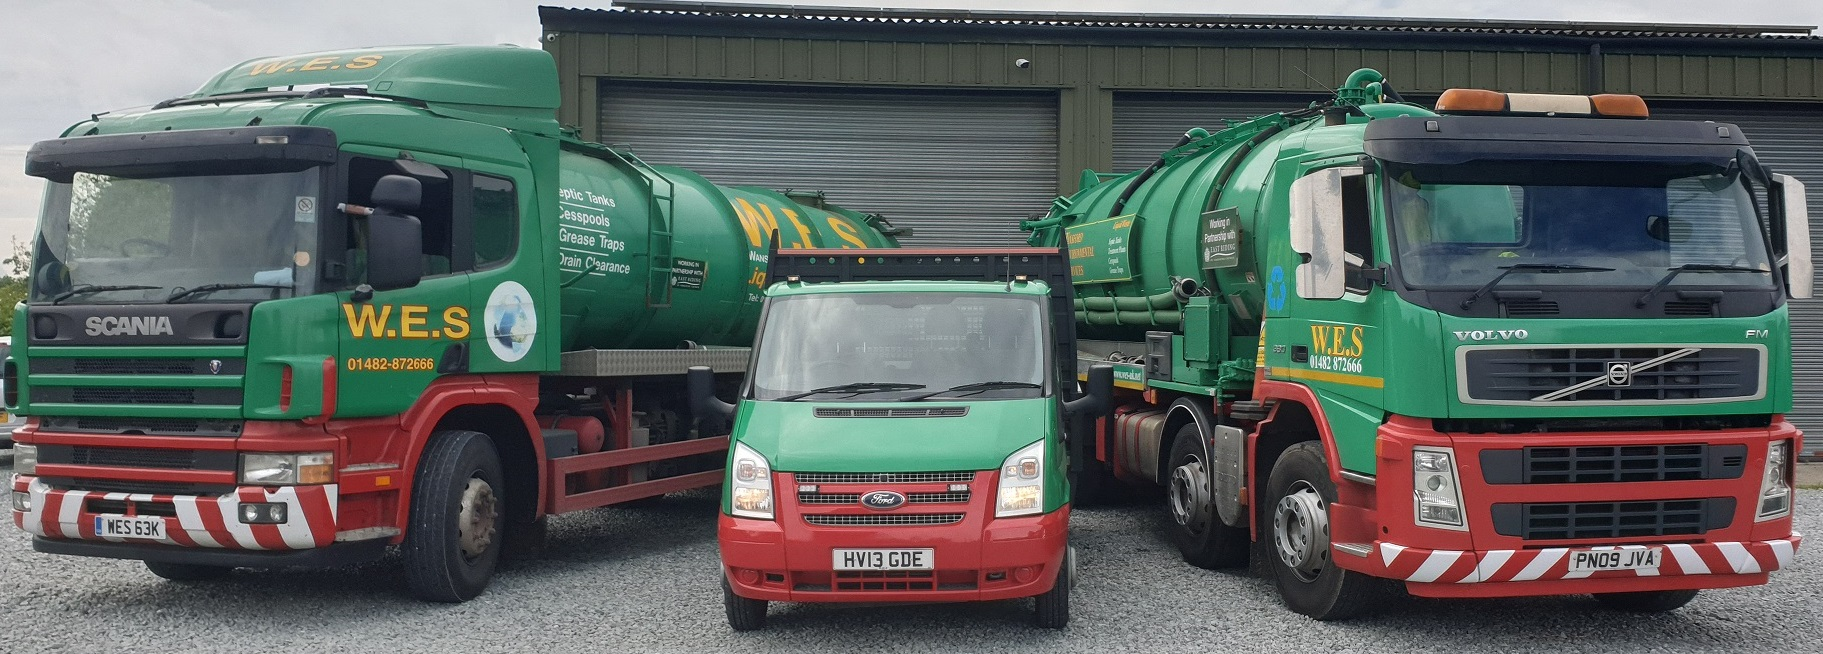 Septic Tank Emptying in the East Riding